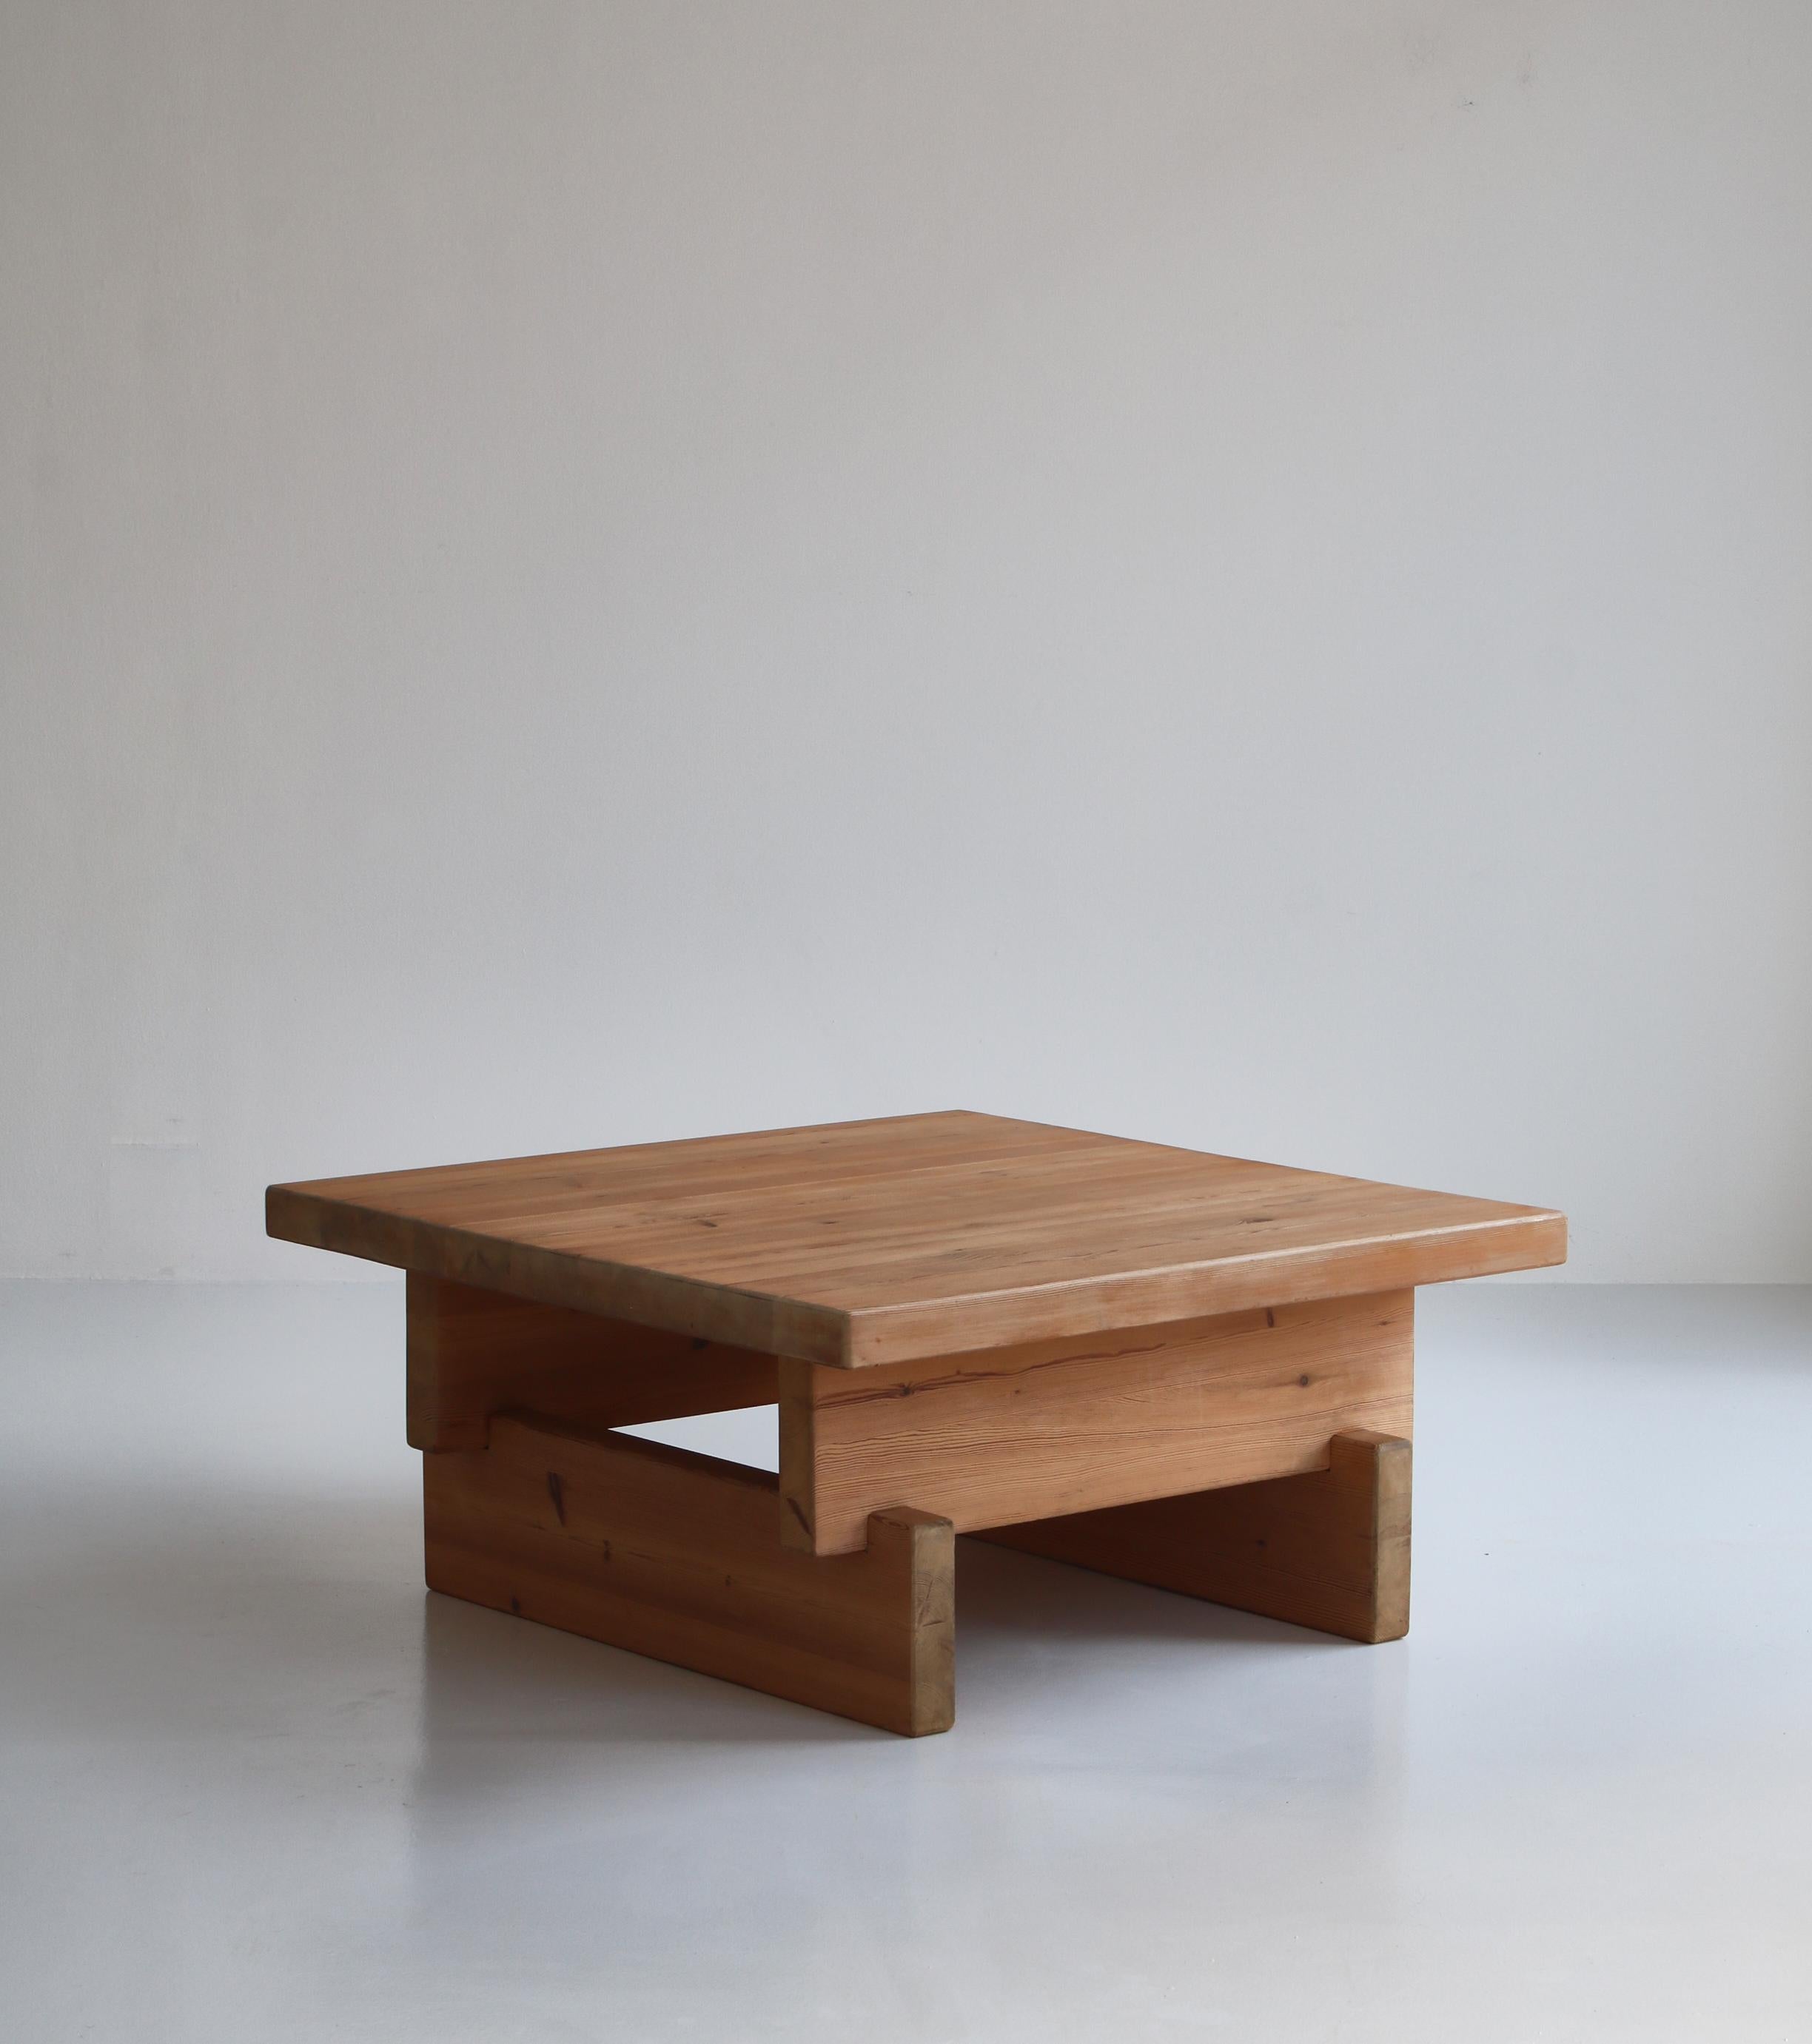 Swedish designer Roland Wilhelmsson designed this table in 1972 and it was manufactured at Karl Andersson and Söner. The “Kvadrat” coffee table has a look that is rustic, crisp, and geometric at the same time, which is a rare feat to behold.